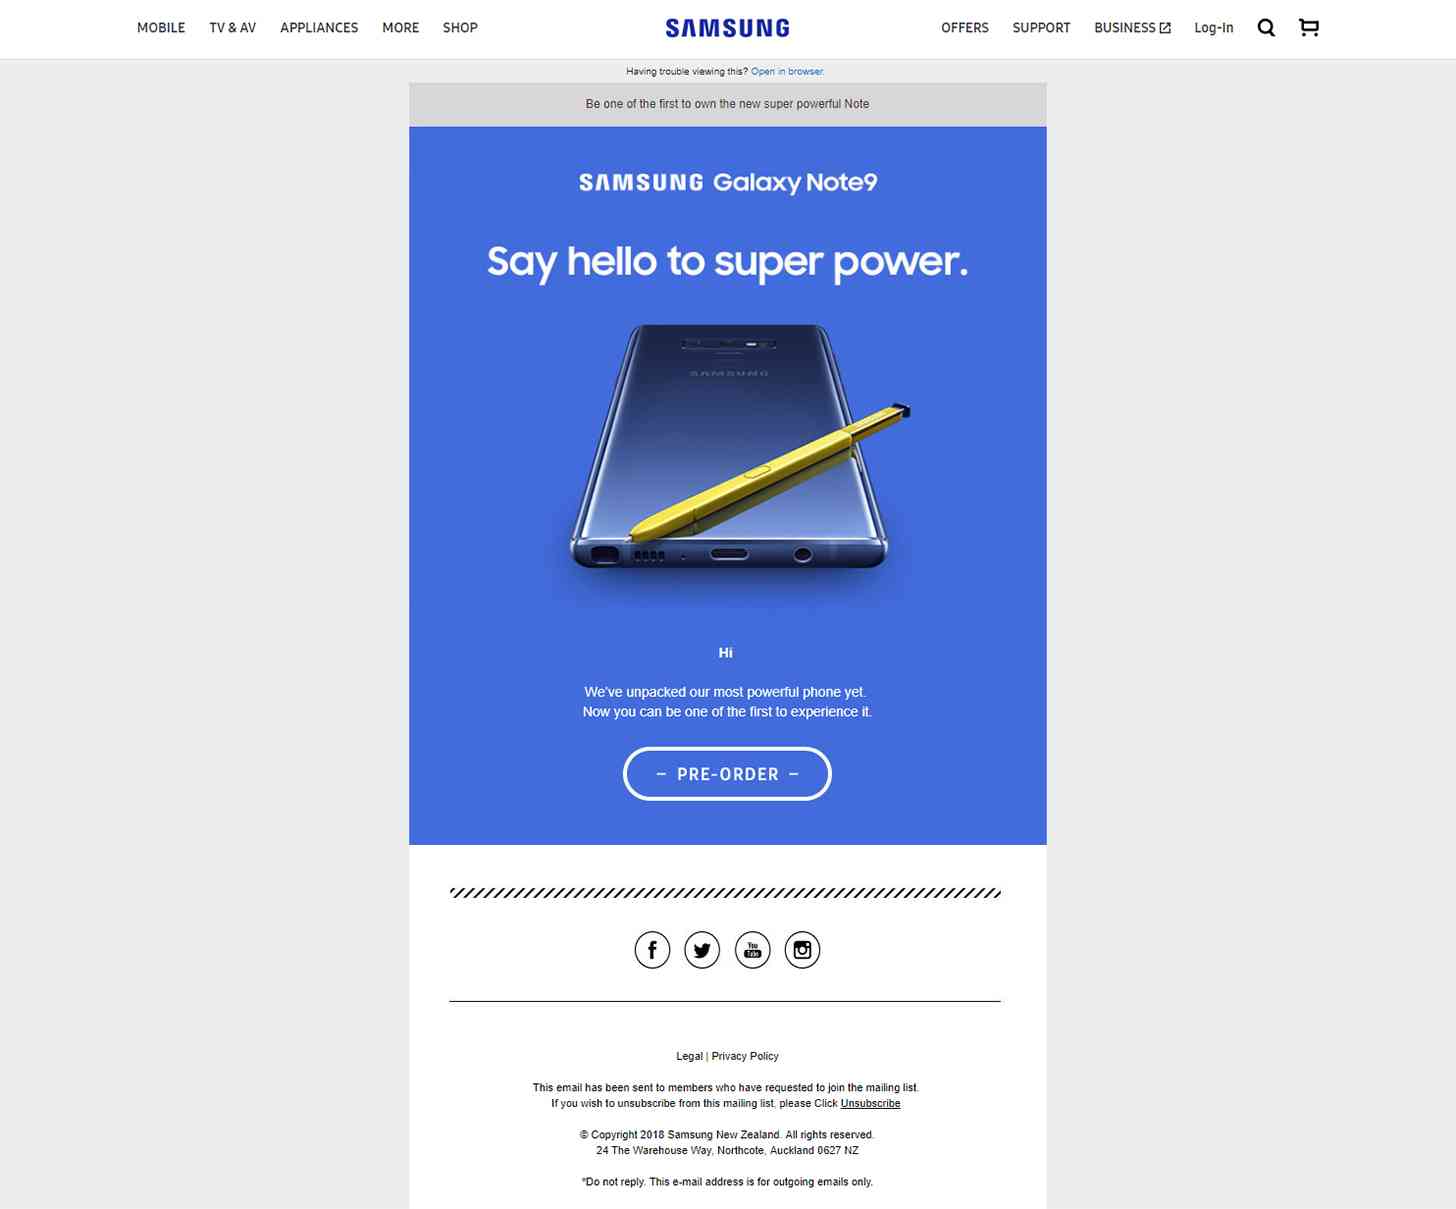 Samsung Galaxy Note 9 full web page